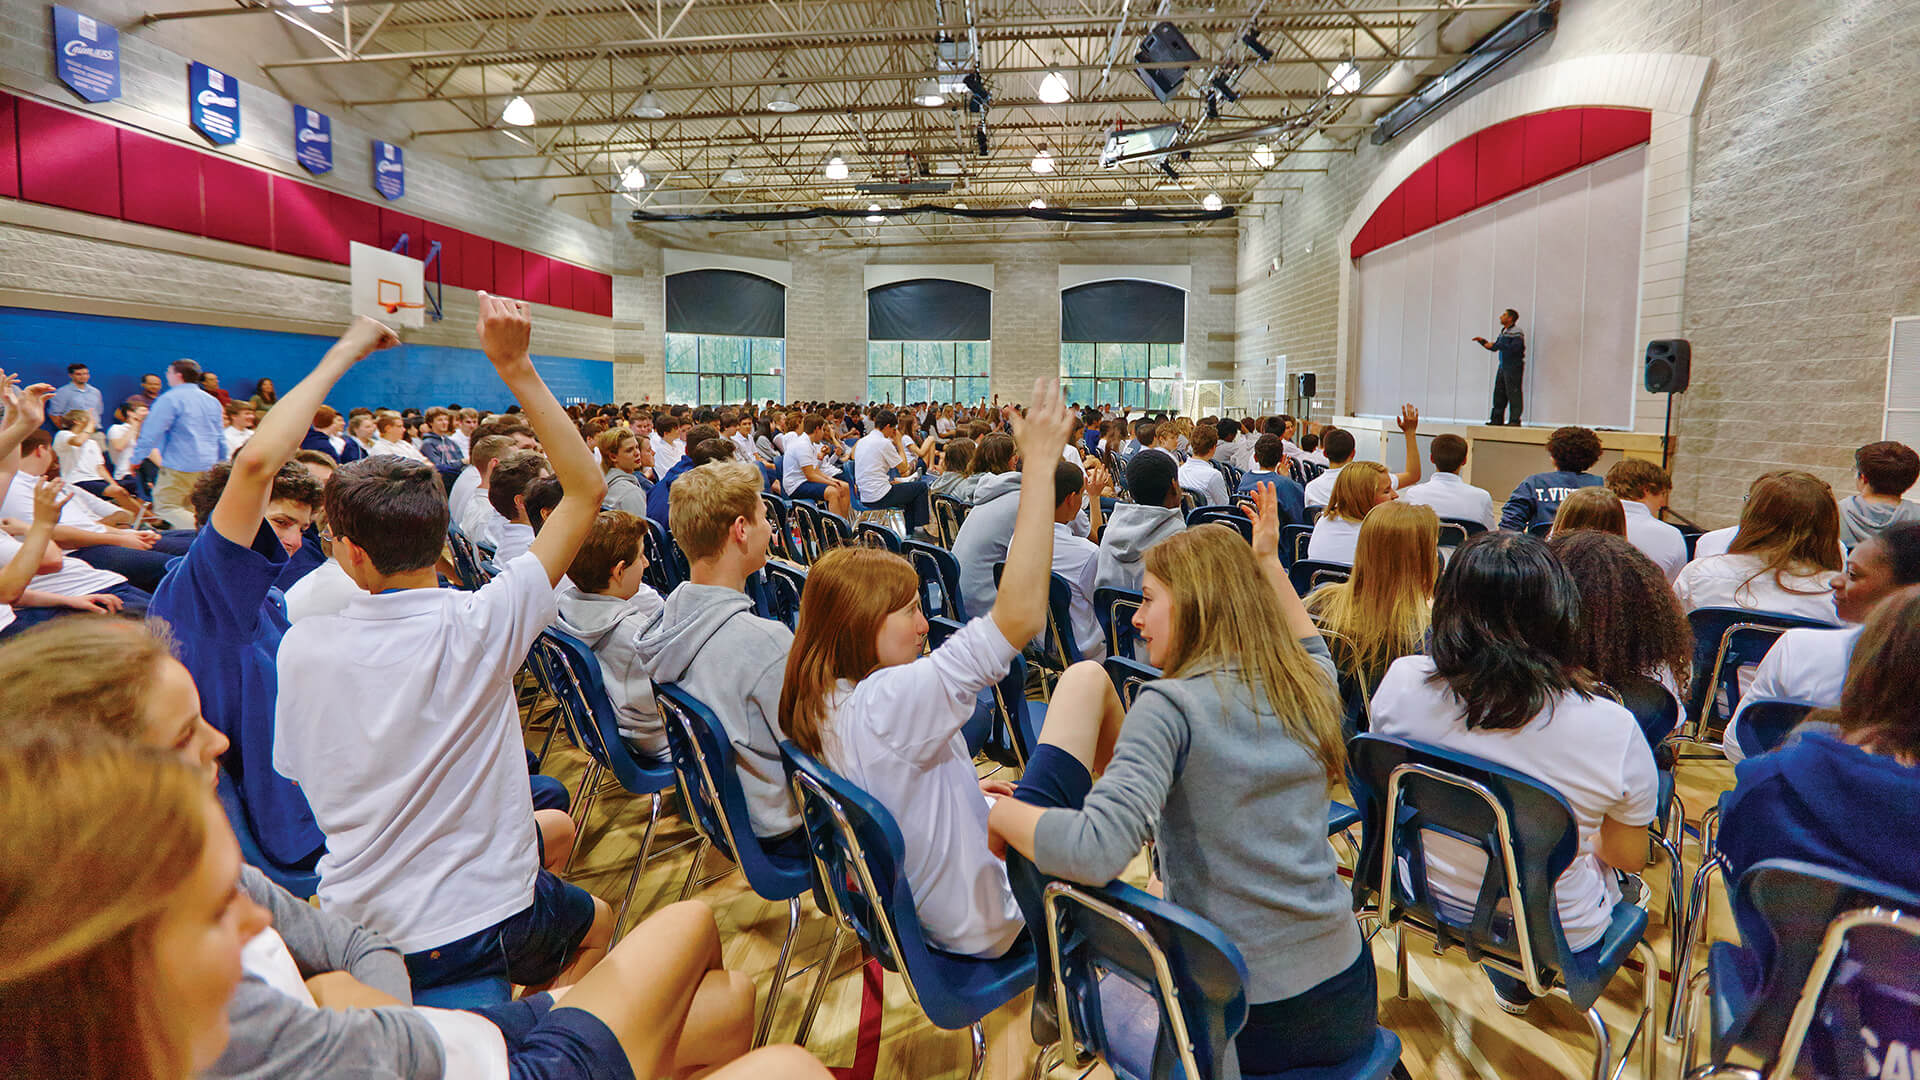 students enthusiastically raising their hands in an assembly